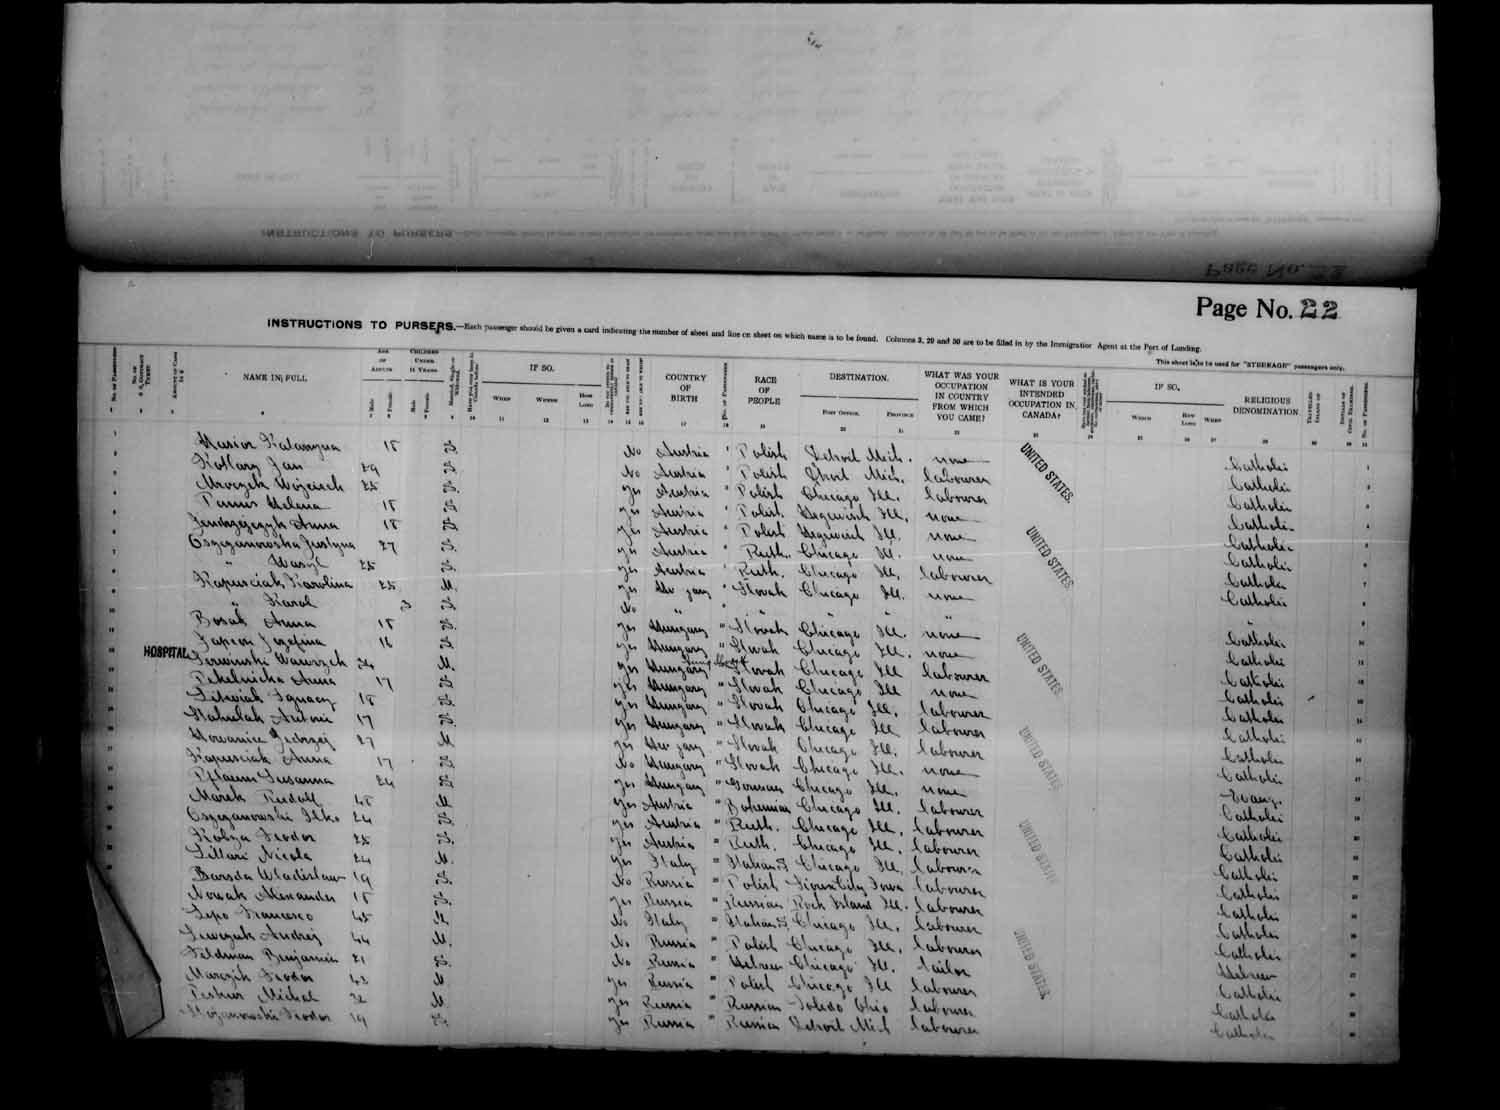 Digitized page of Passenger Lists for Image No.: e003686930